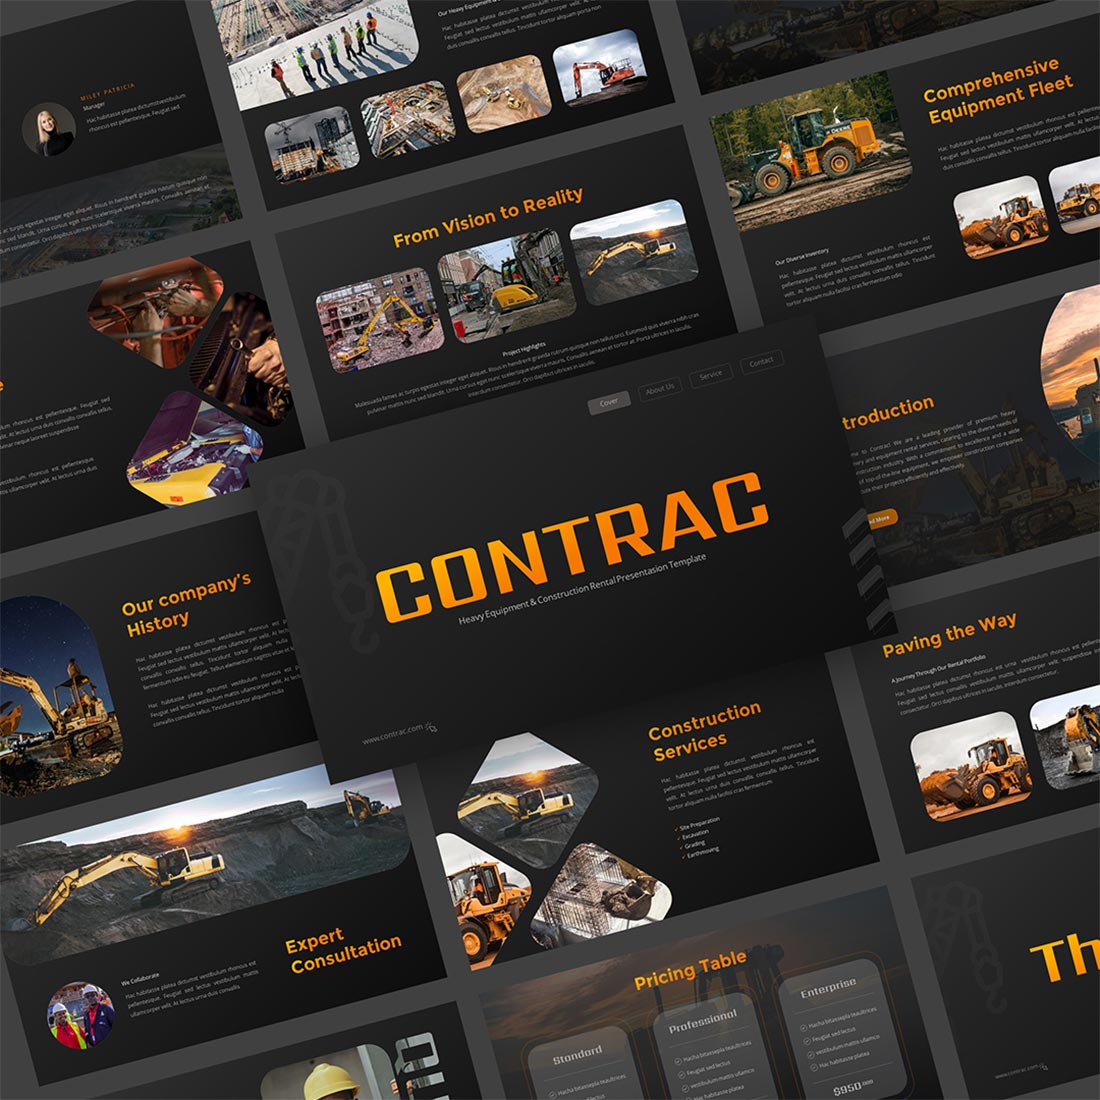 Contrac - Heavy Equipment & Construction Rental PowerPoint Template cover image.